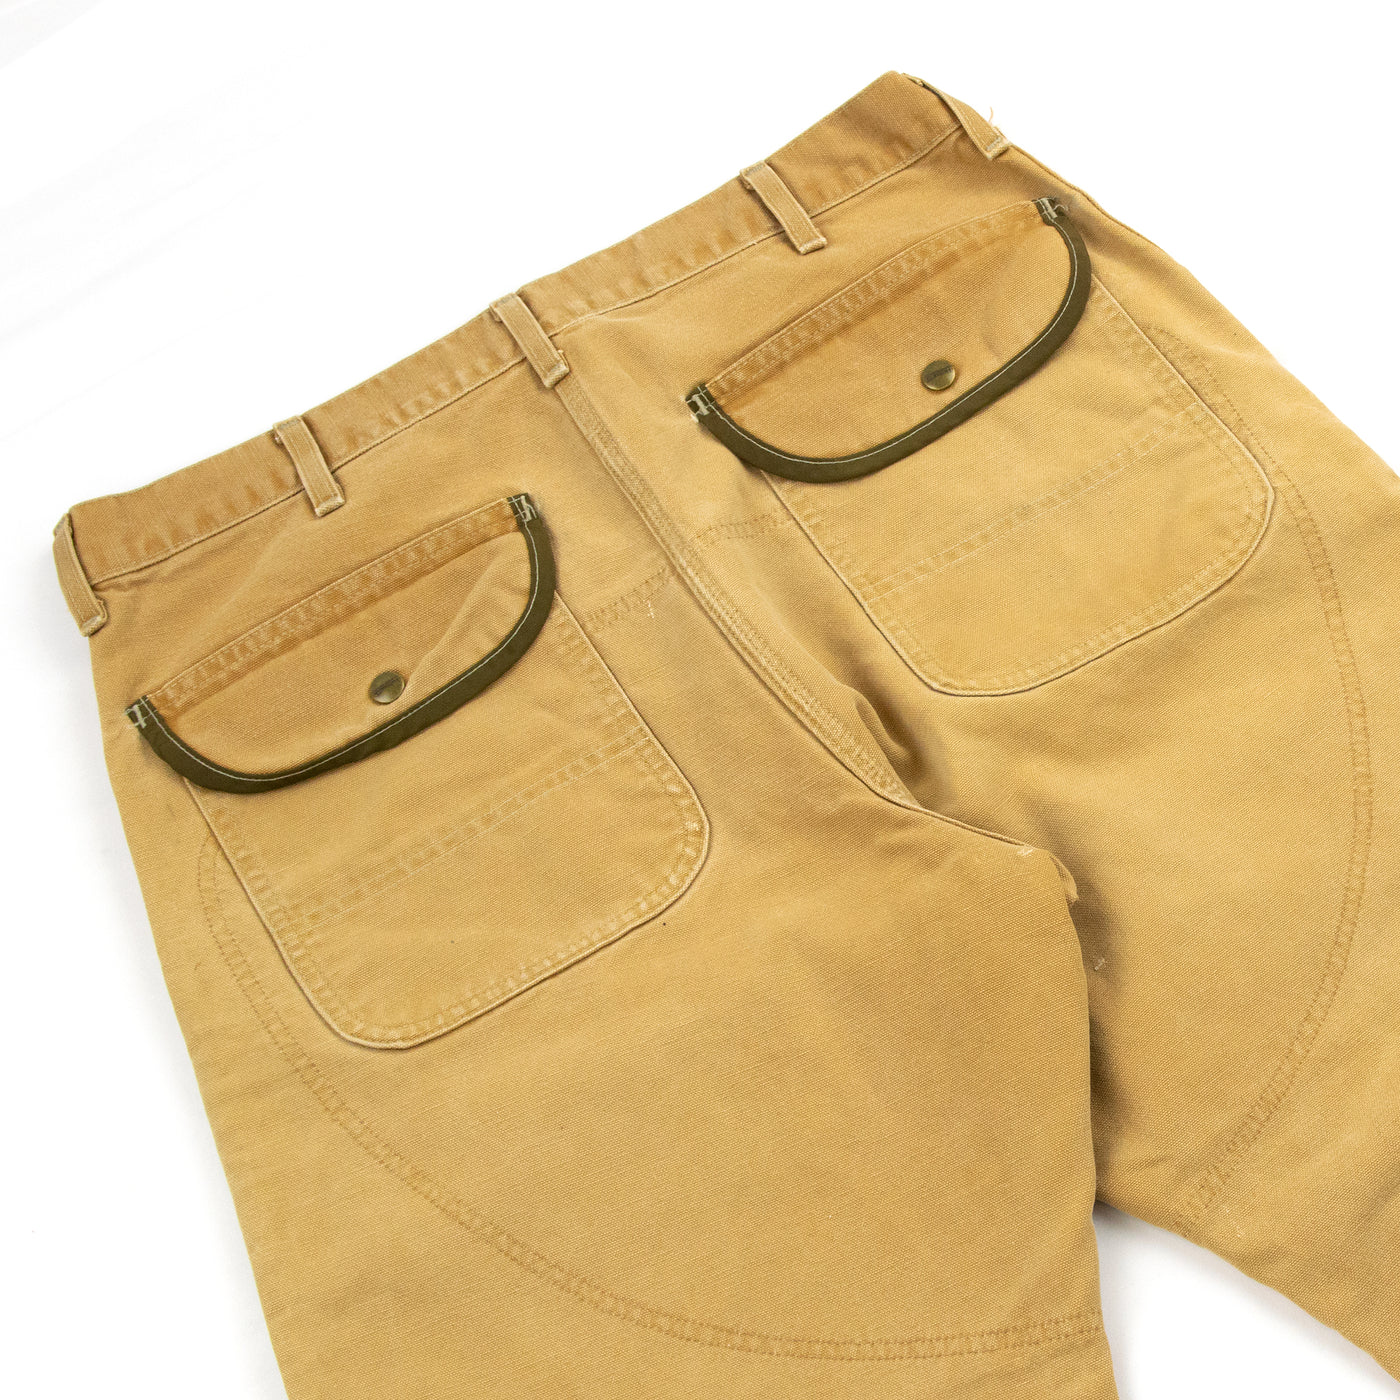 Vintage Carhartt Duck Canvas Utility Trousers With Panels Made in USA 34 W 31 L